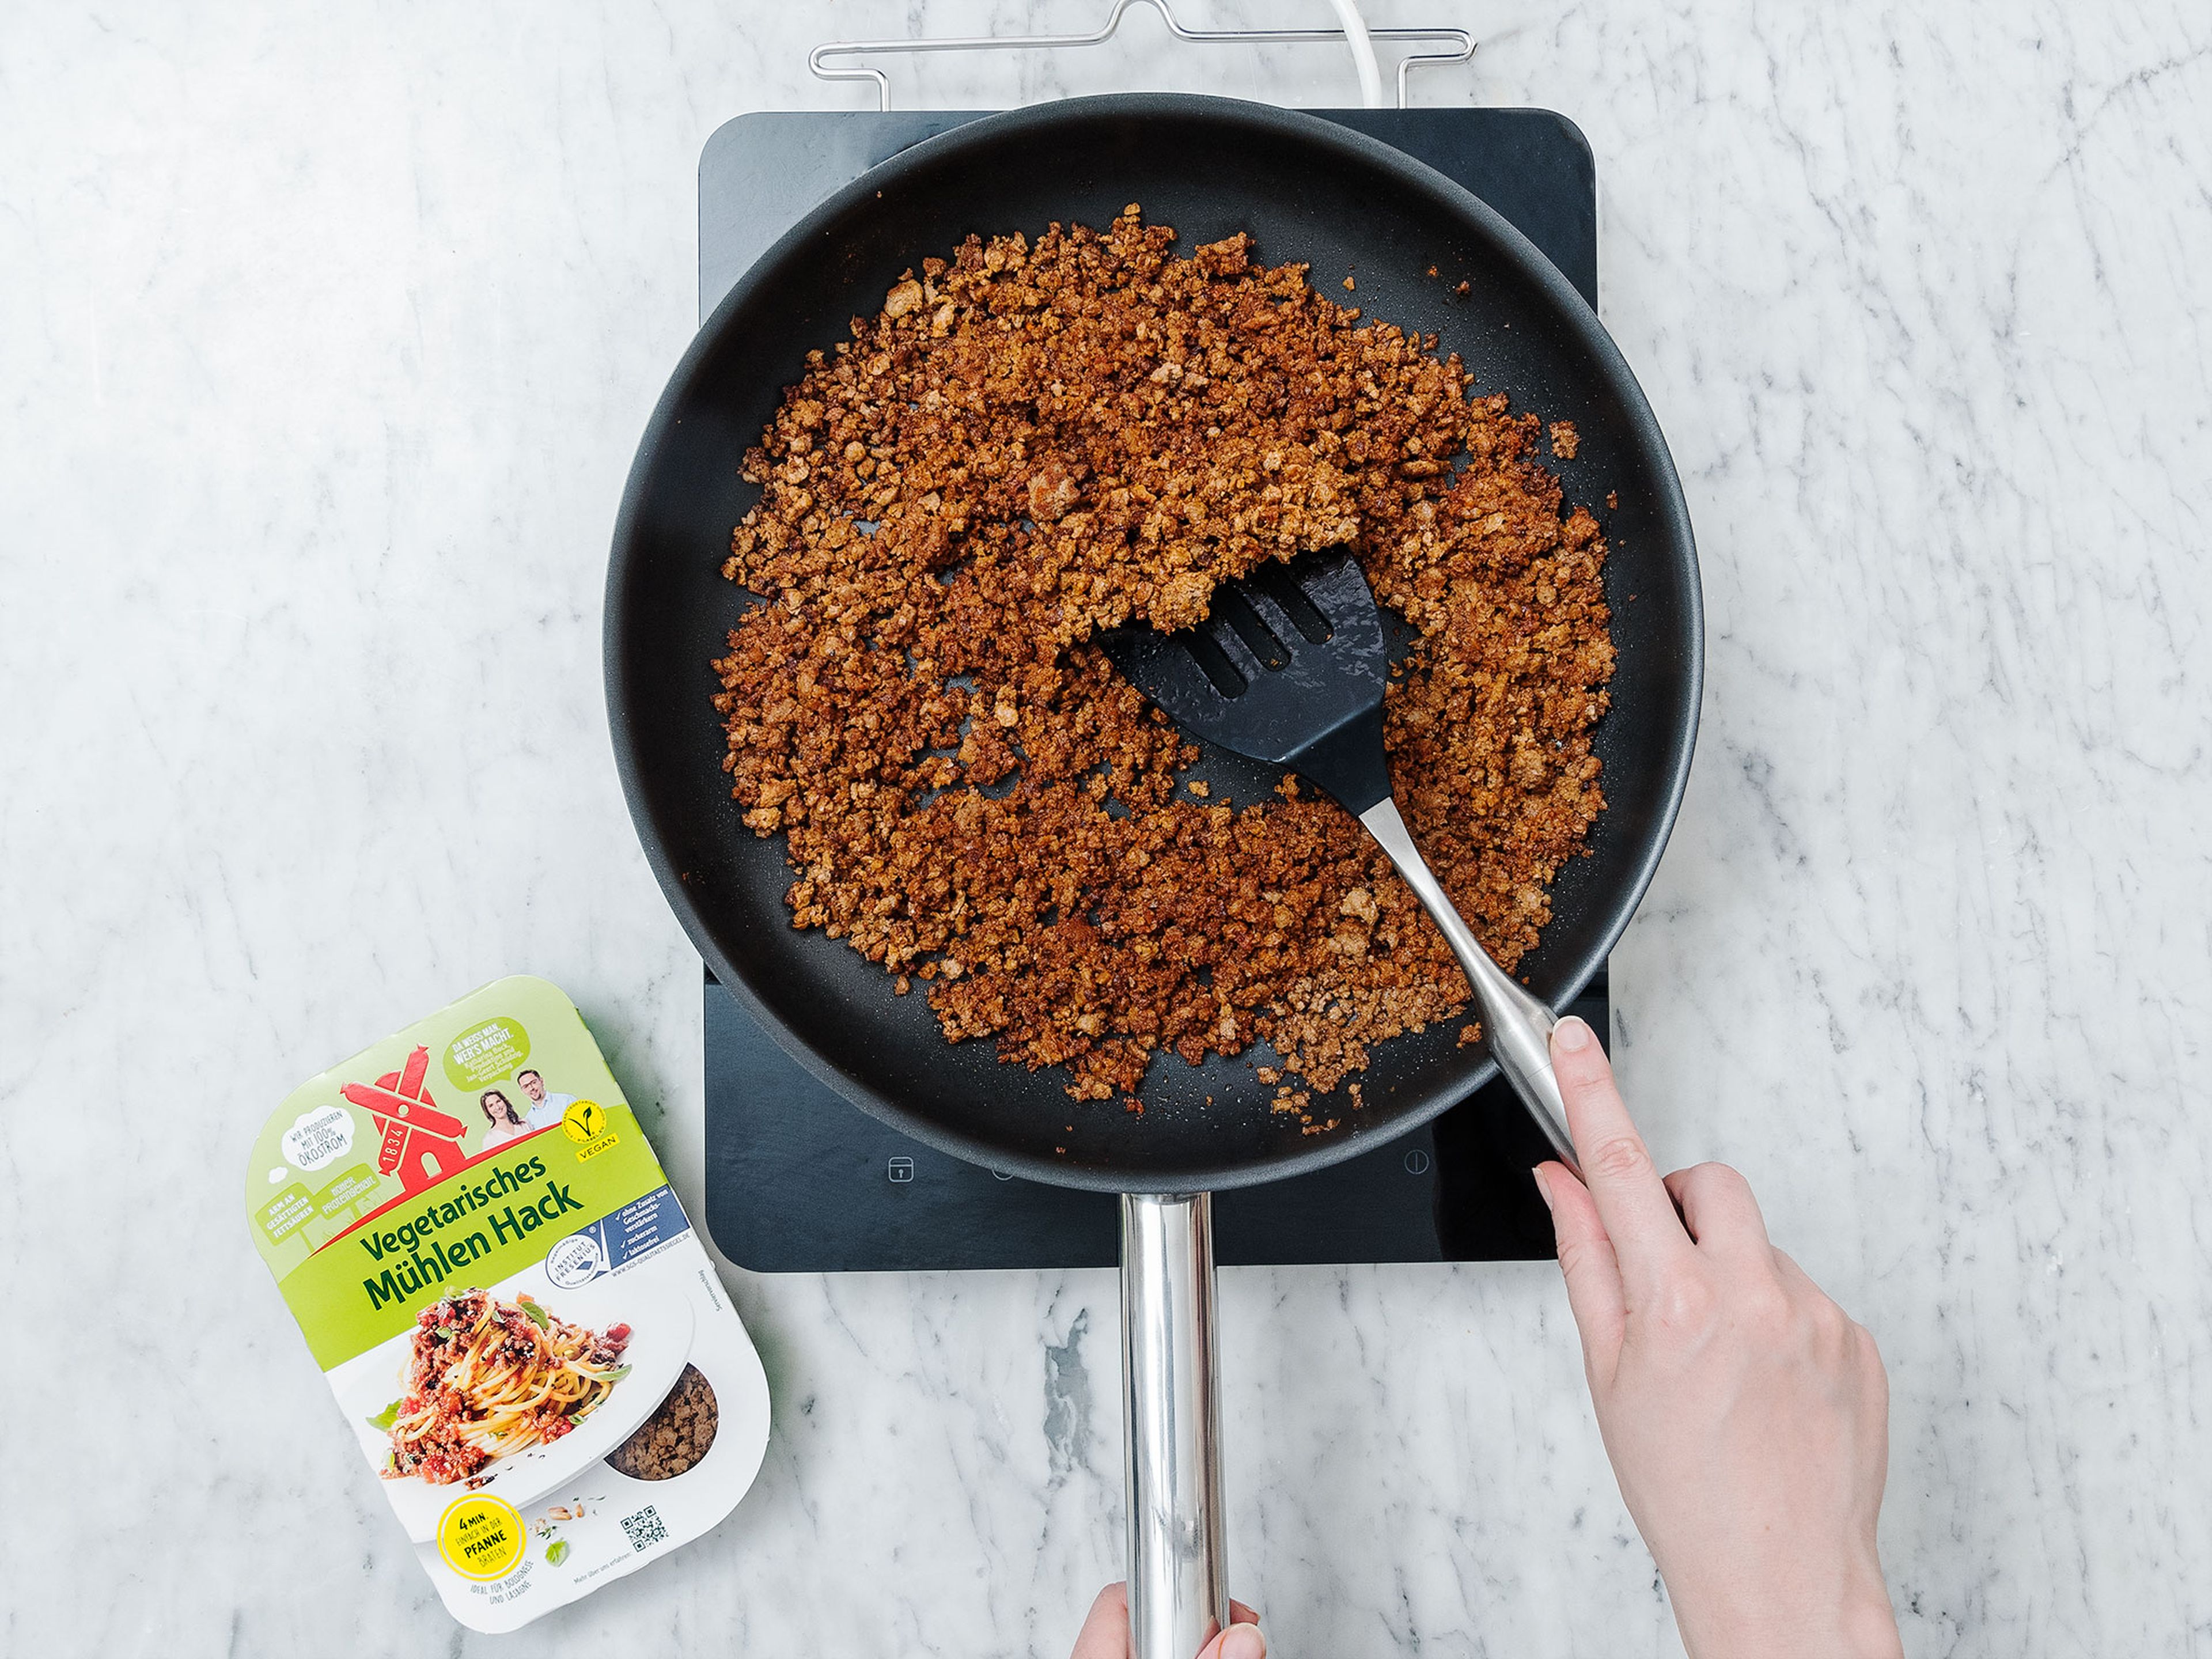 Heat oil in a large frying pan. Add vegetarian ground meat and fry for approx. 4 min. Add soy sauce, red pepper and smoked paprika and stir to combine. Season with salt and pepper to taste.